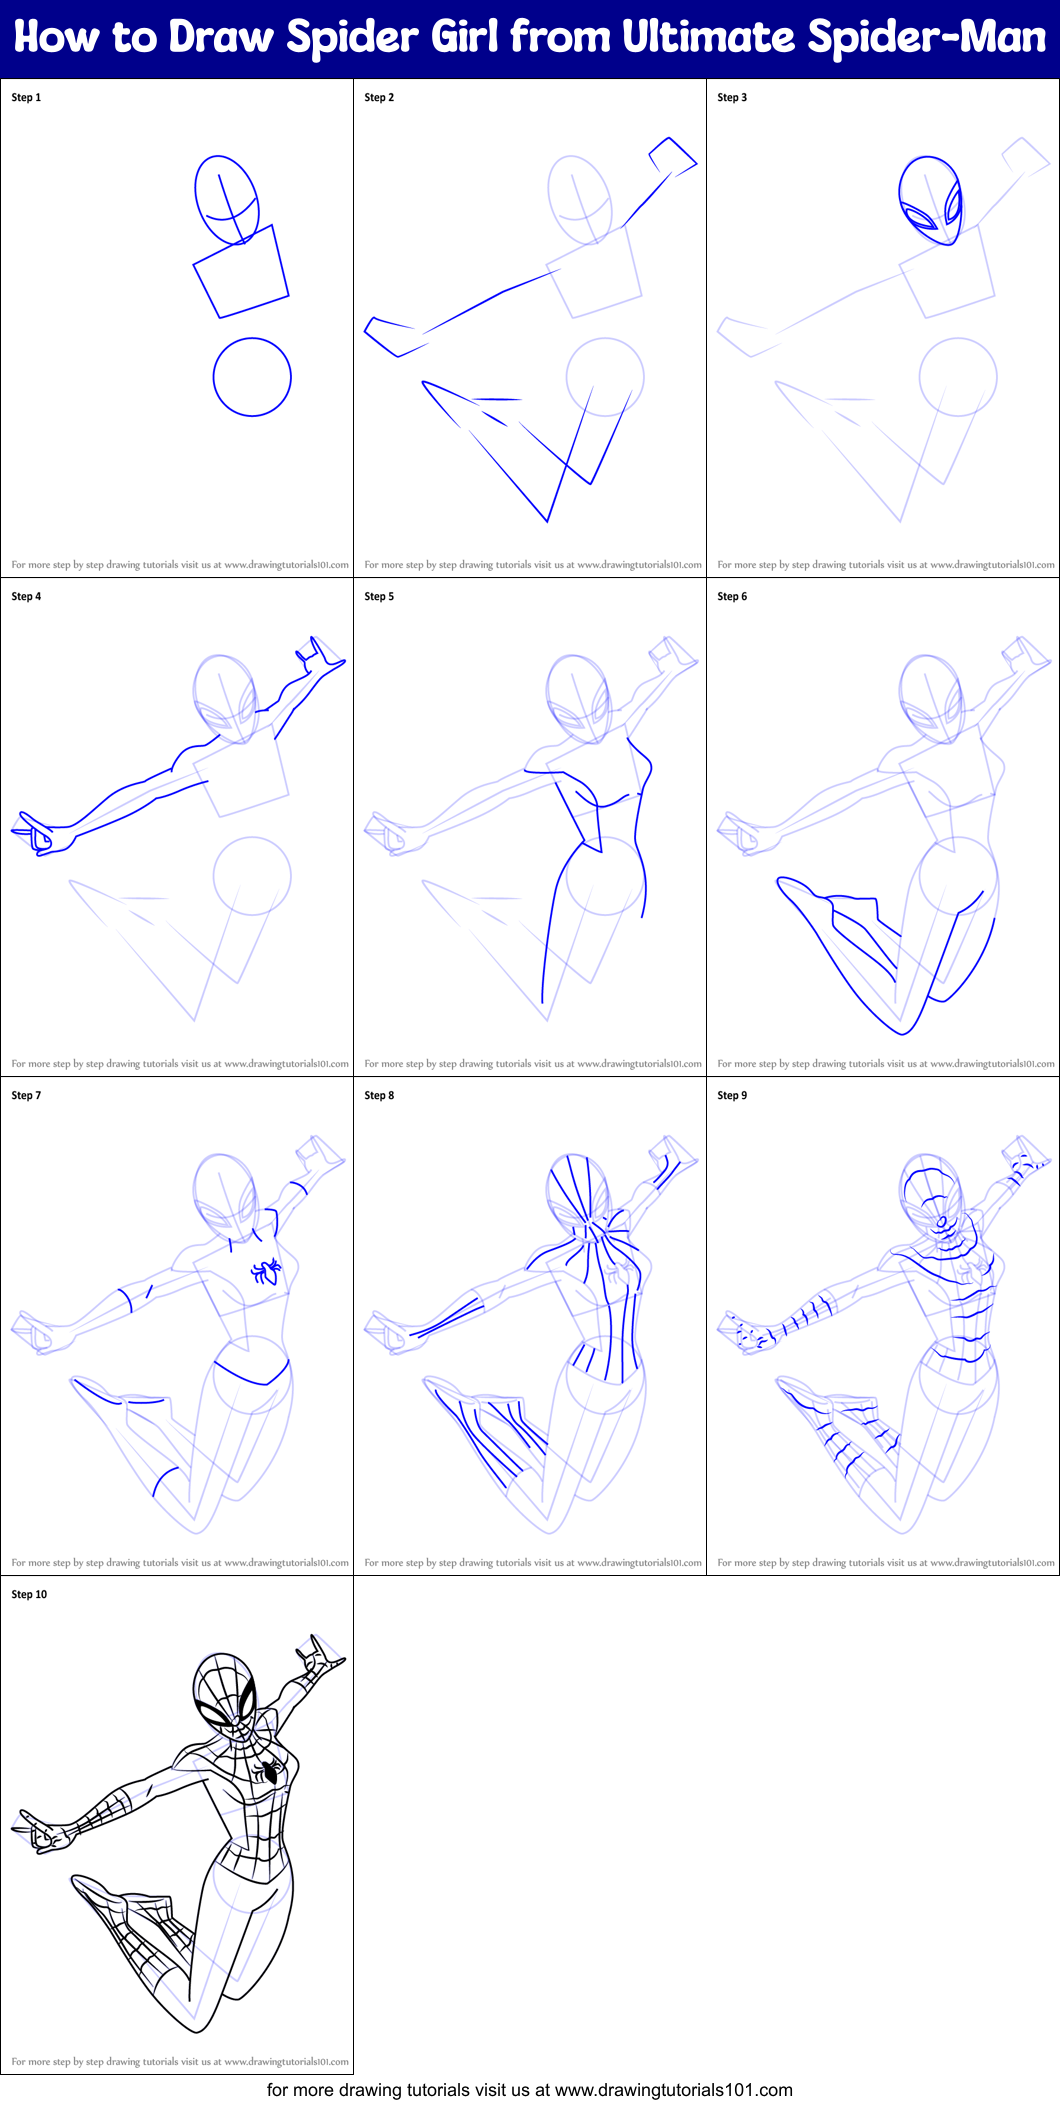 How to Draw Spider Girl from Ultimate Spider-Man printable step by step